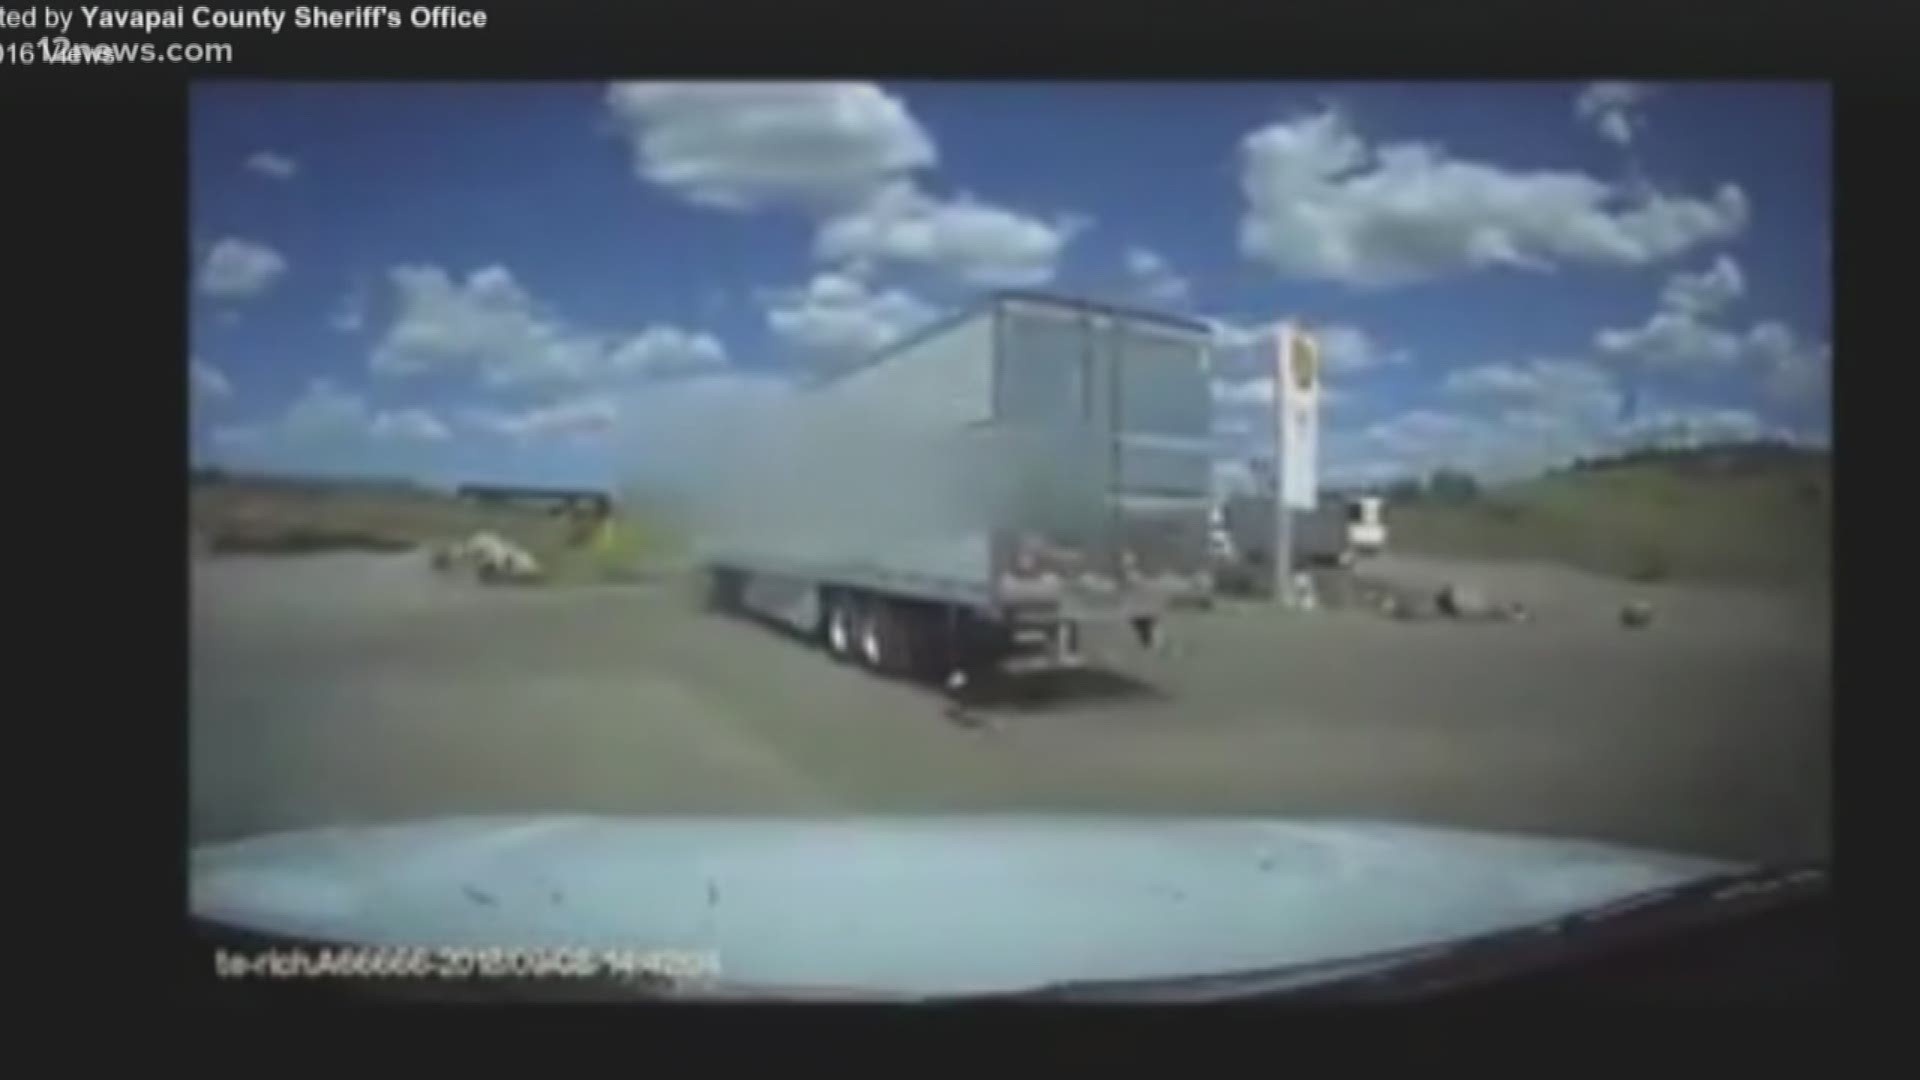 A volunteer with the Yavapai County Sheriff's Office happened to be in the right place at the right time to save a pit bull puppy from being dragged behind a semi-truck. His dash camera captured it all.